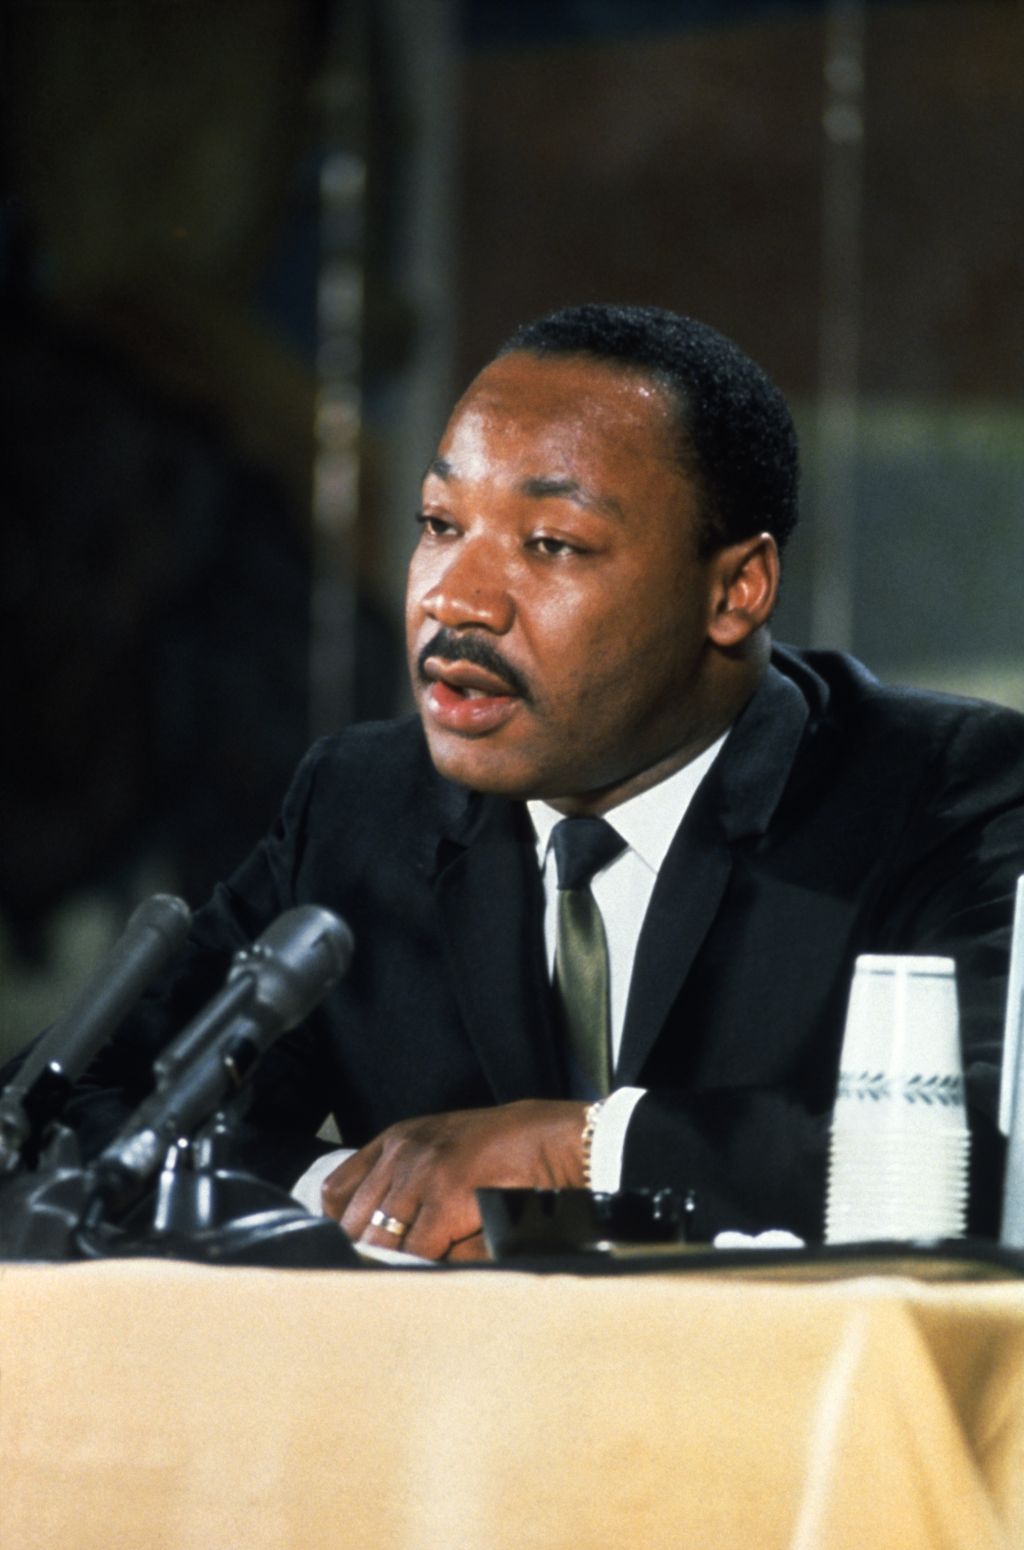 Let Freedom Ring 12 Rare Photos Of Dr. Martin Luther King Jr.